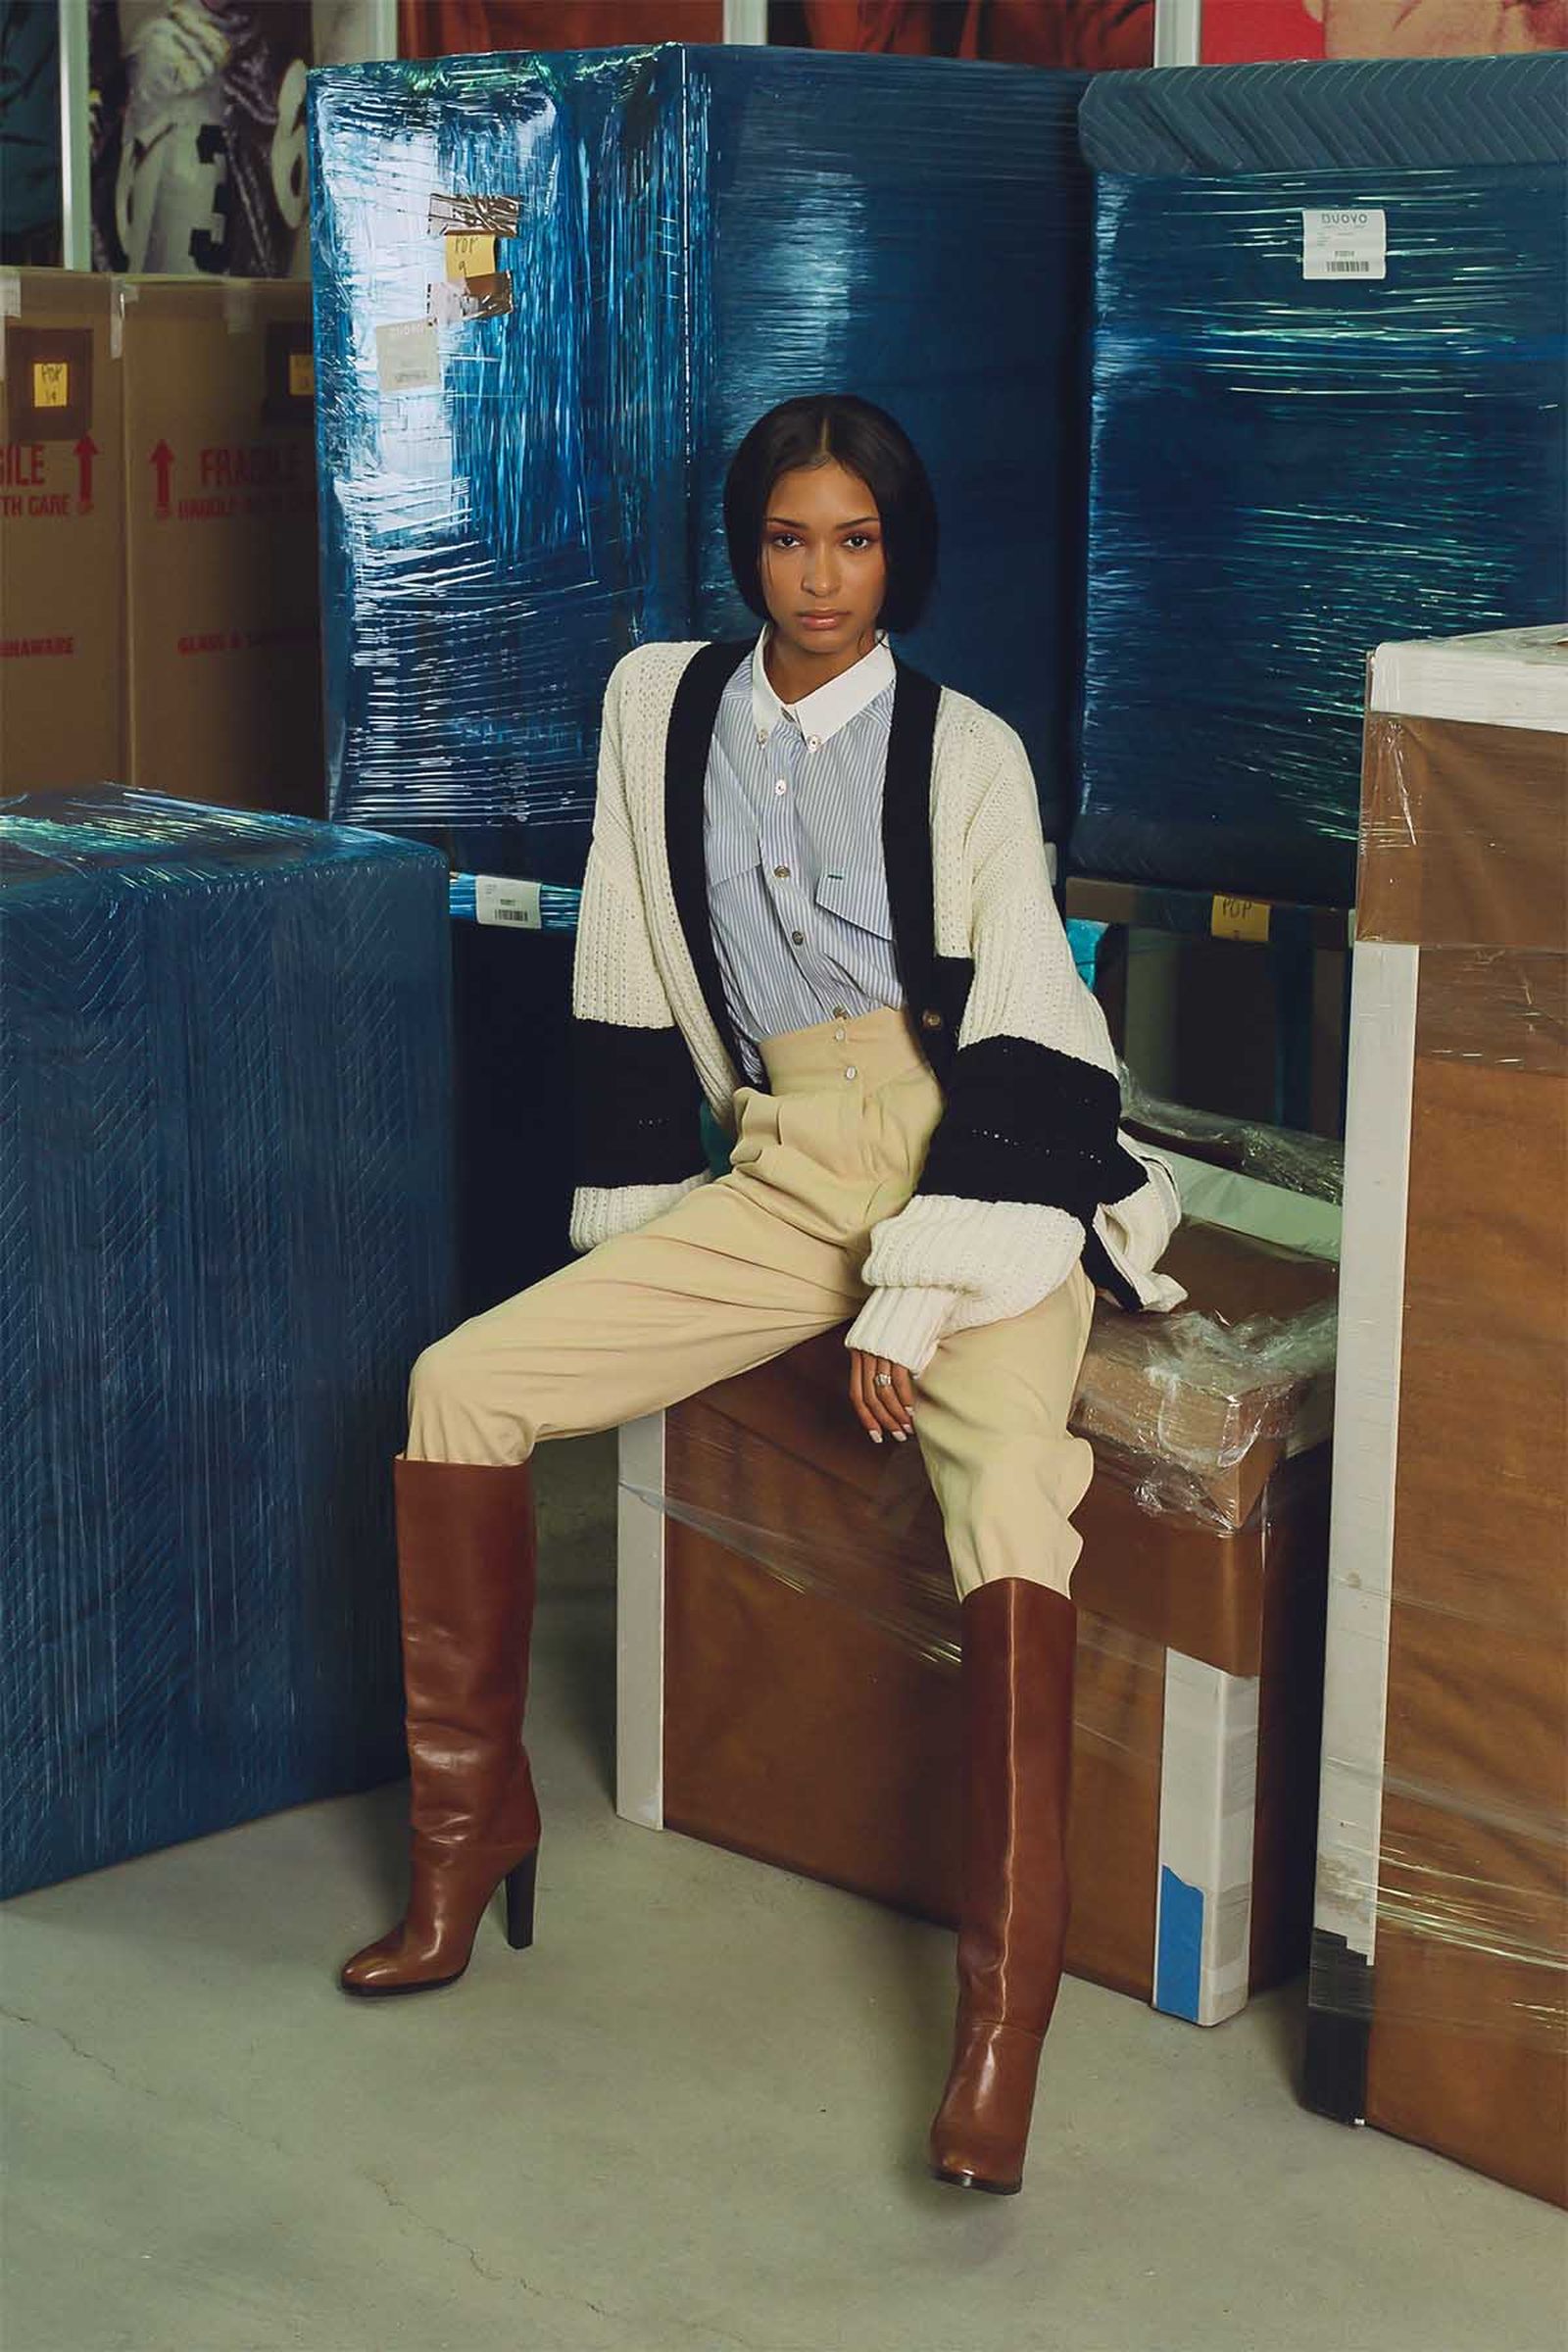 Hilfiger Collection Women’s Letterman Cardigan and Heritage Shirt (Fall 2020), Tommy Hilfiger Women’s Cropped Wool Pleat Trousers (Fall 1982), Tommy Hilfiger Collection Women’s Leather Knee-High Boots (Fall 2009)